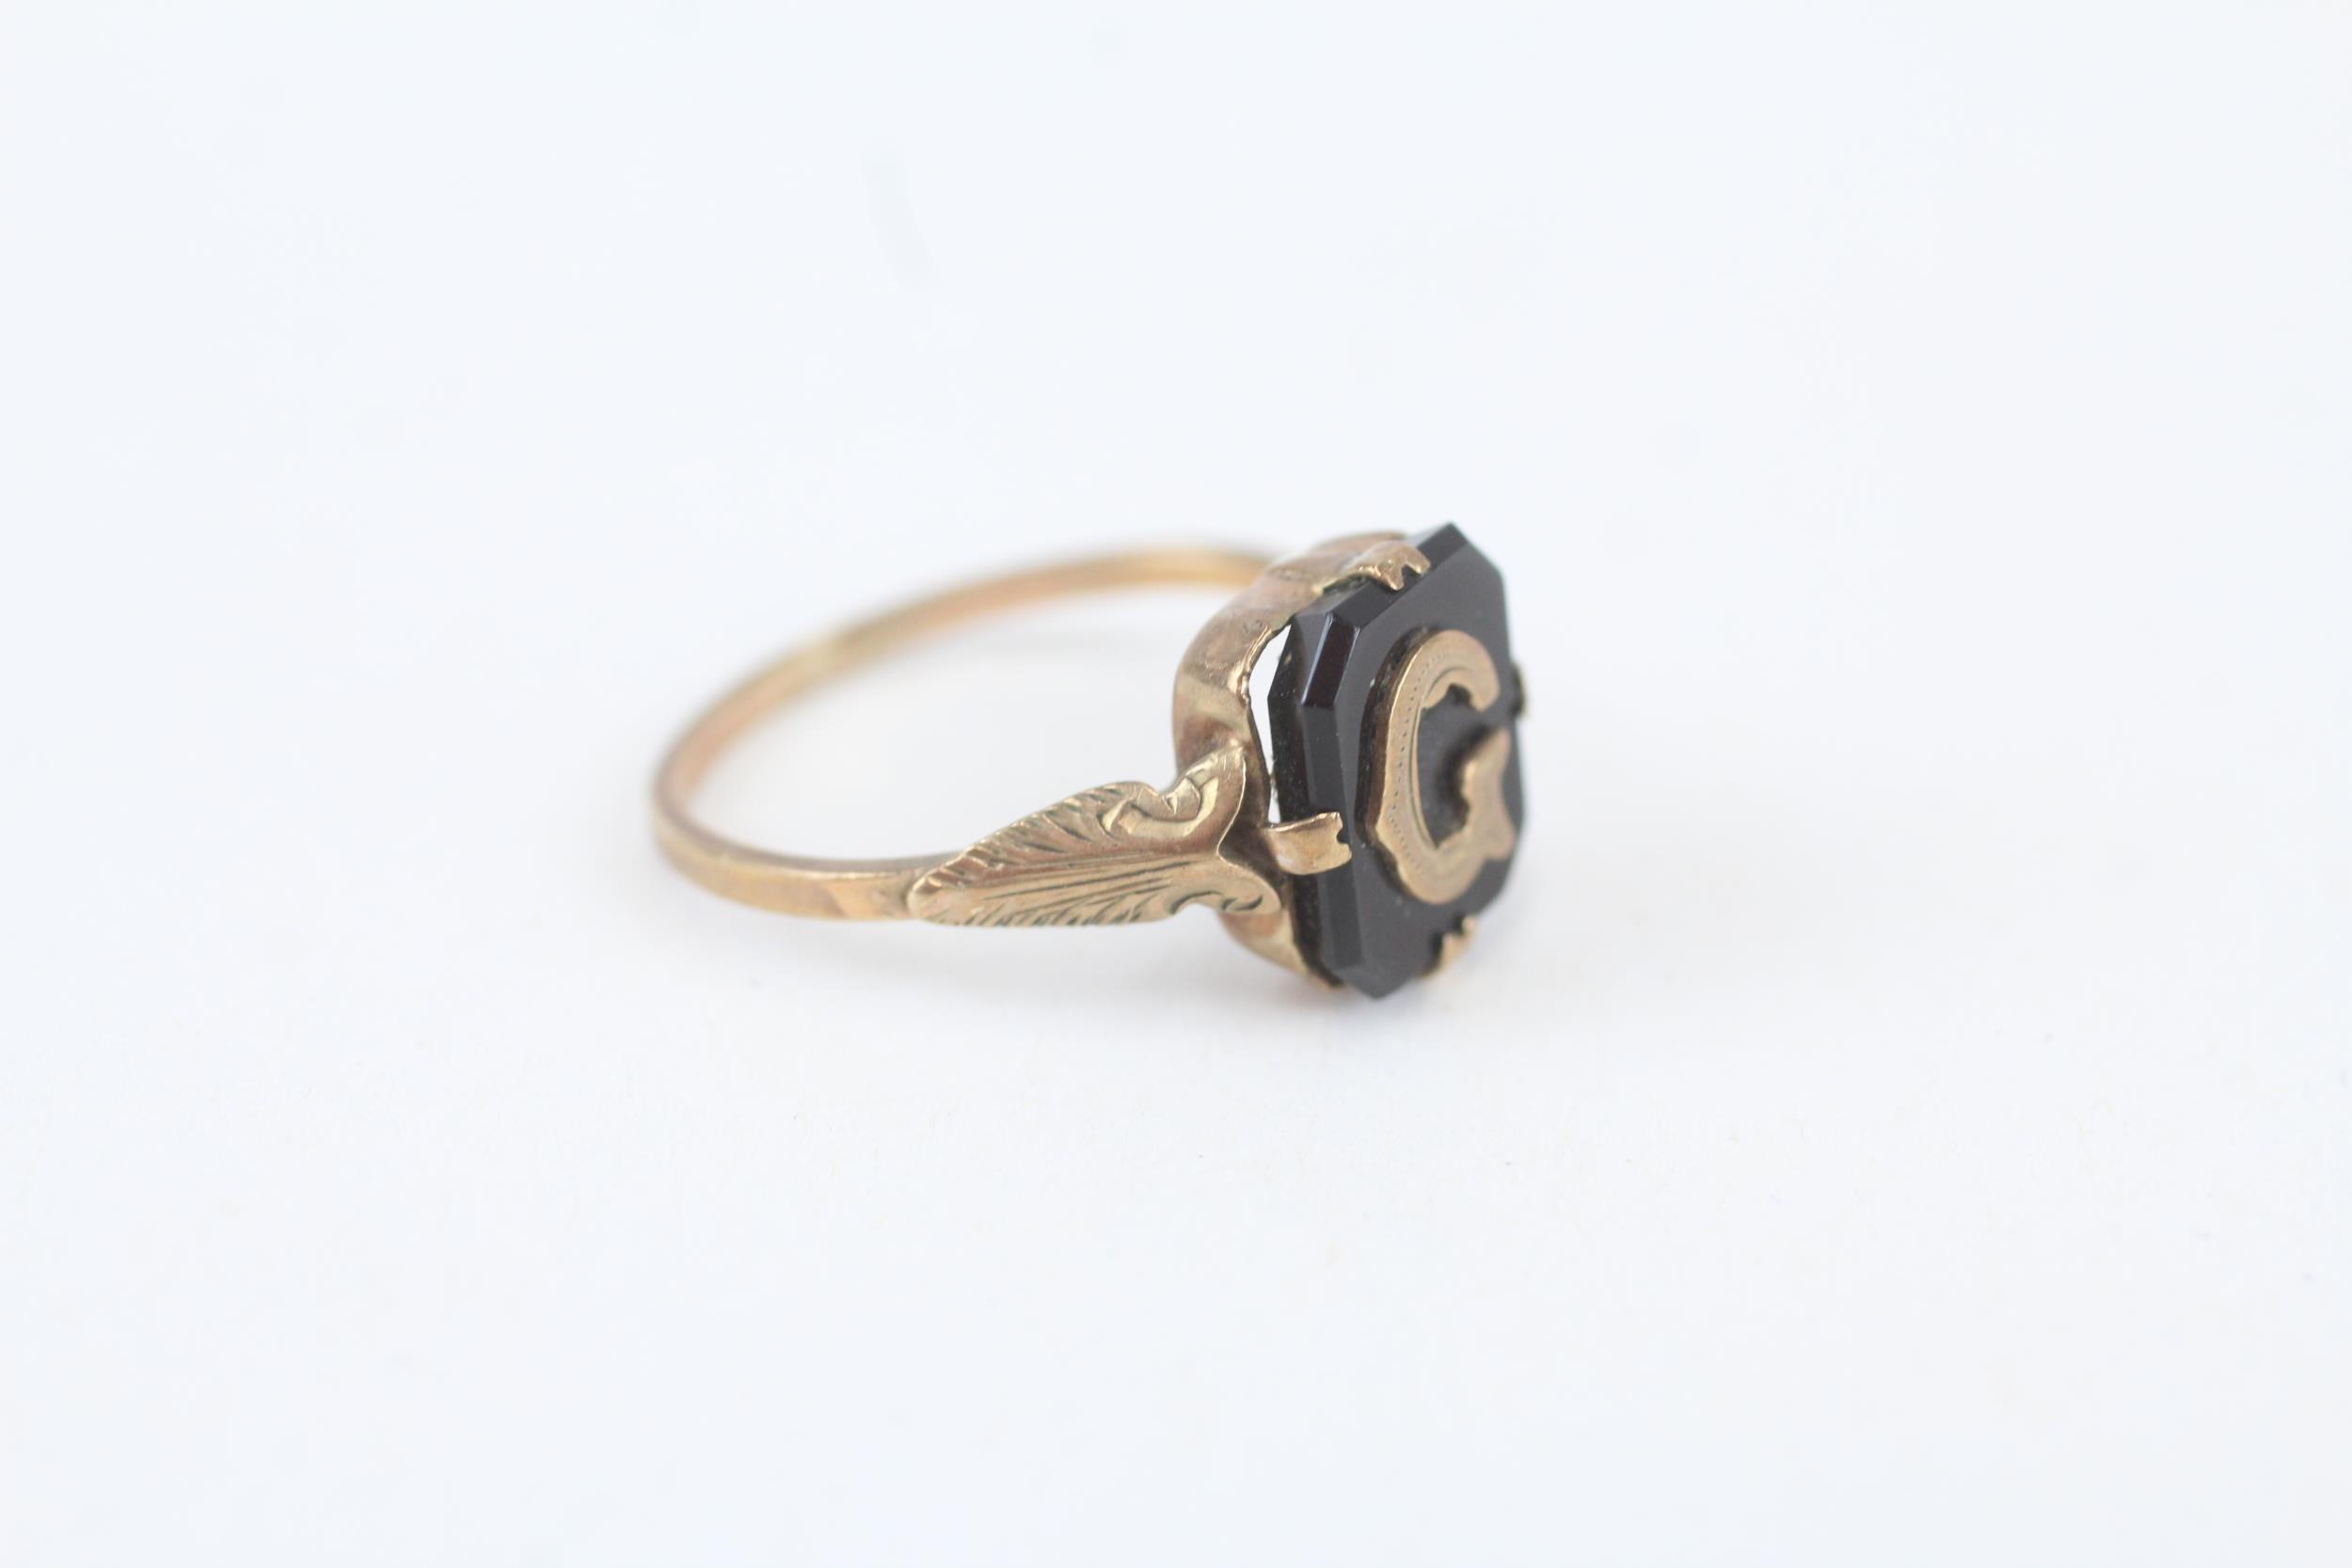 9ct gold antique onyx initial 'G' signet ring - MISHAPEN - AS SEEN Size J 1.6 g - Image 2 of 4